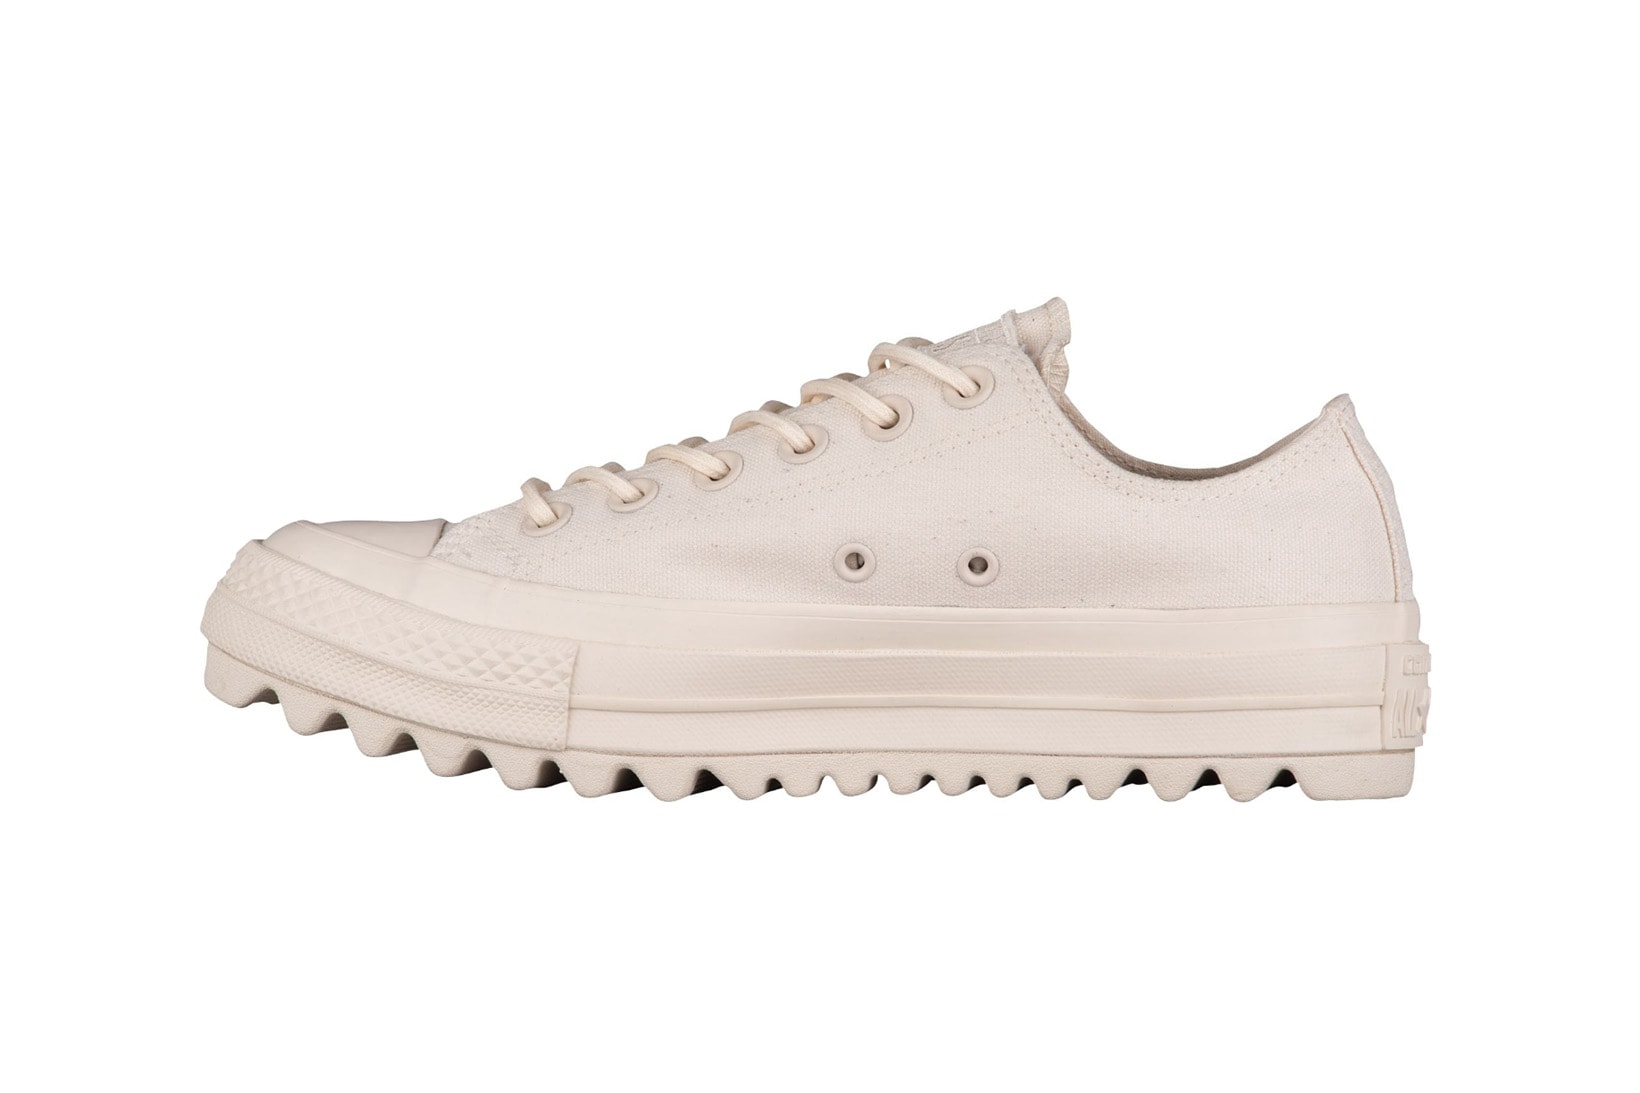 Converse Chuck Taylor All Star Lift Ripple Ox low top hi natural cream off white black canvas jagged sole platform where to buy minimal sneakers